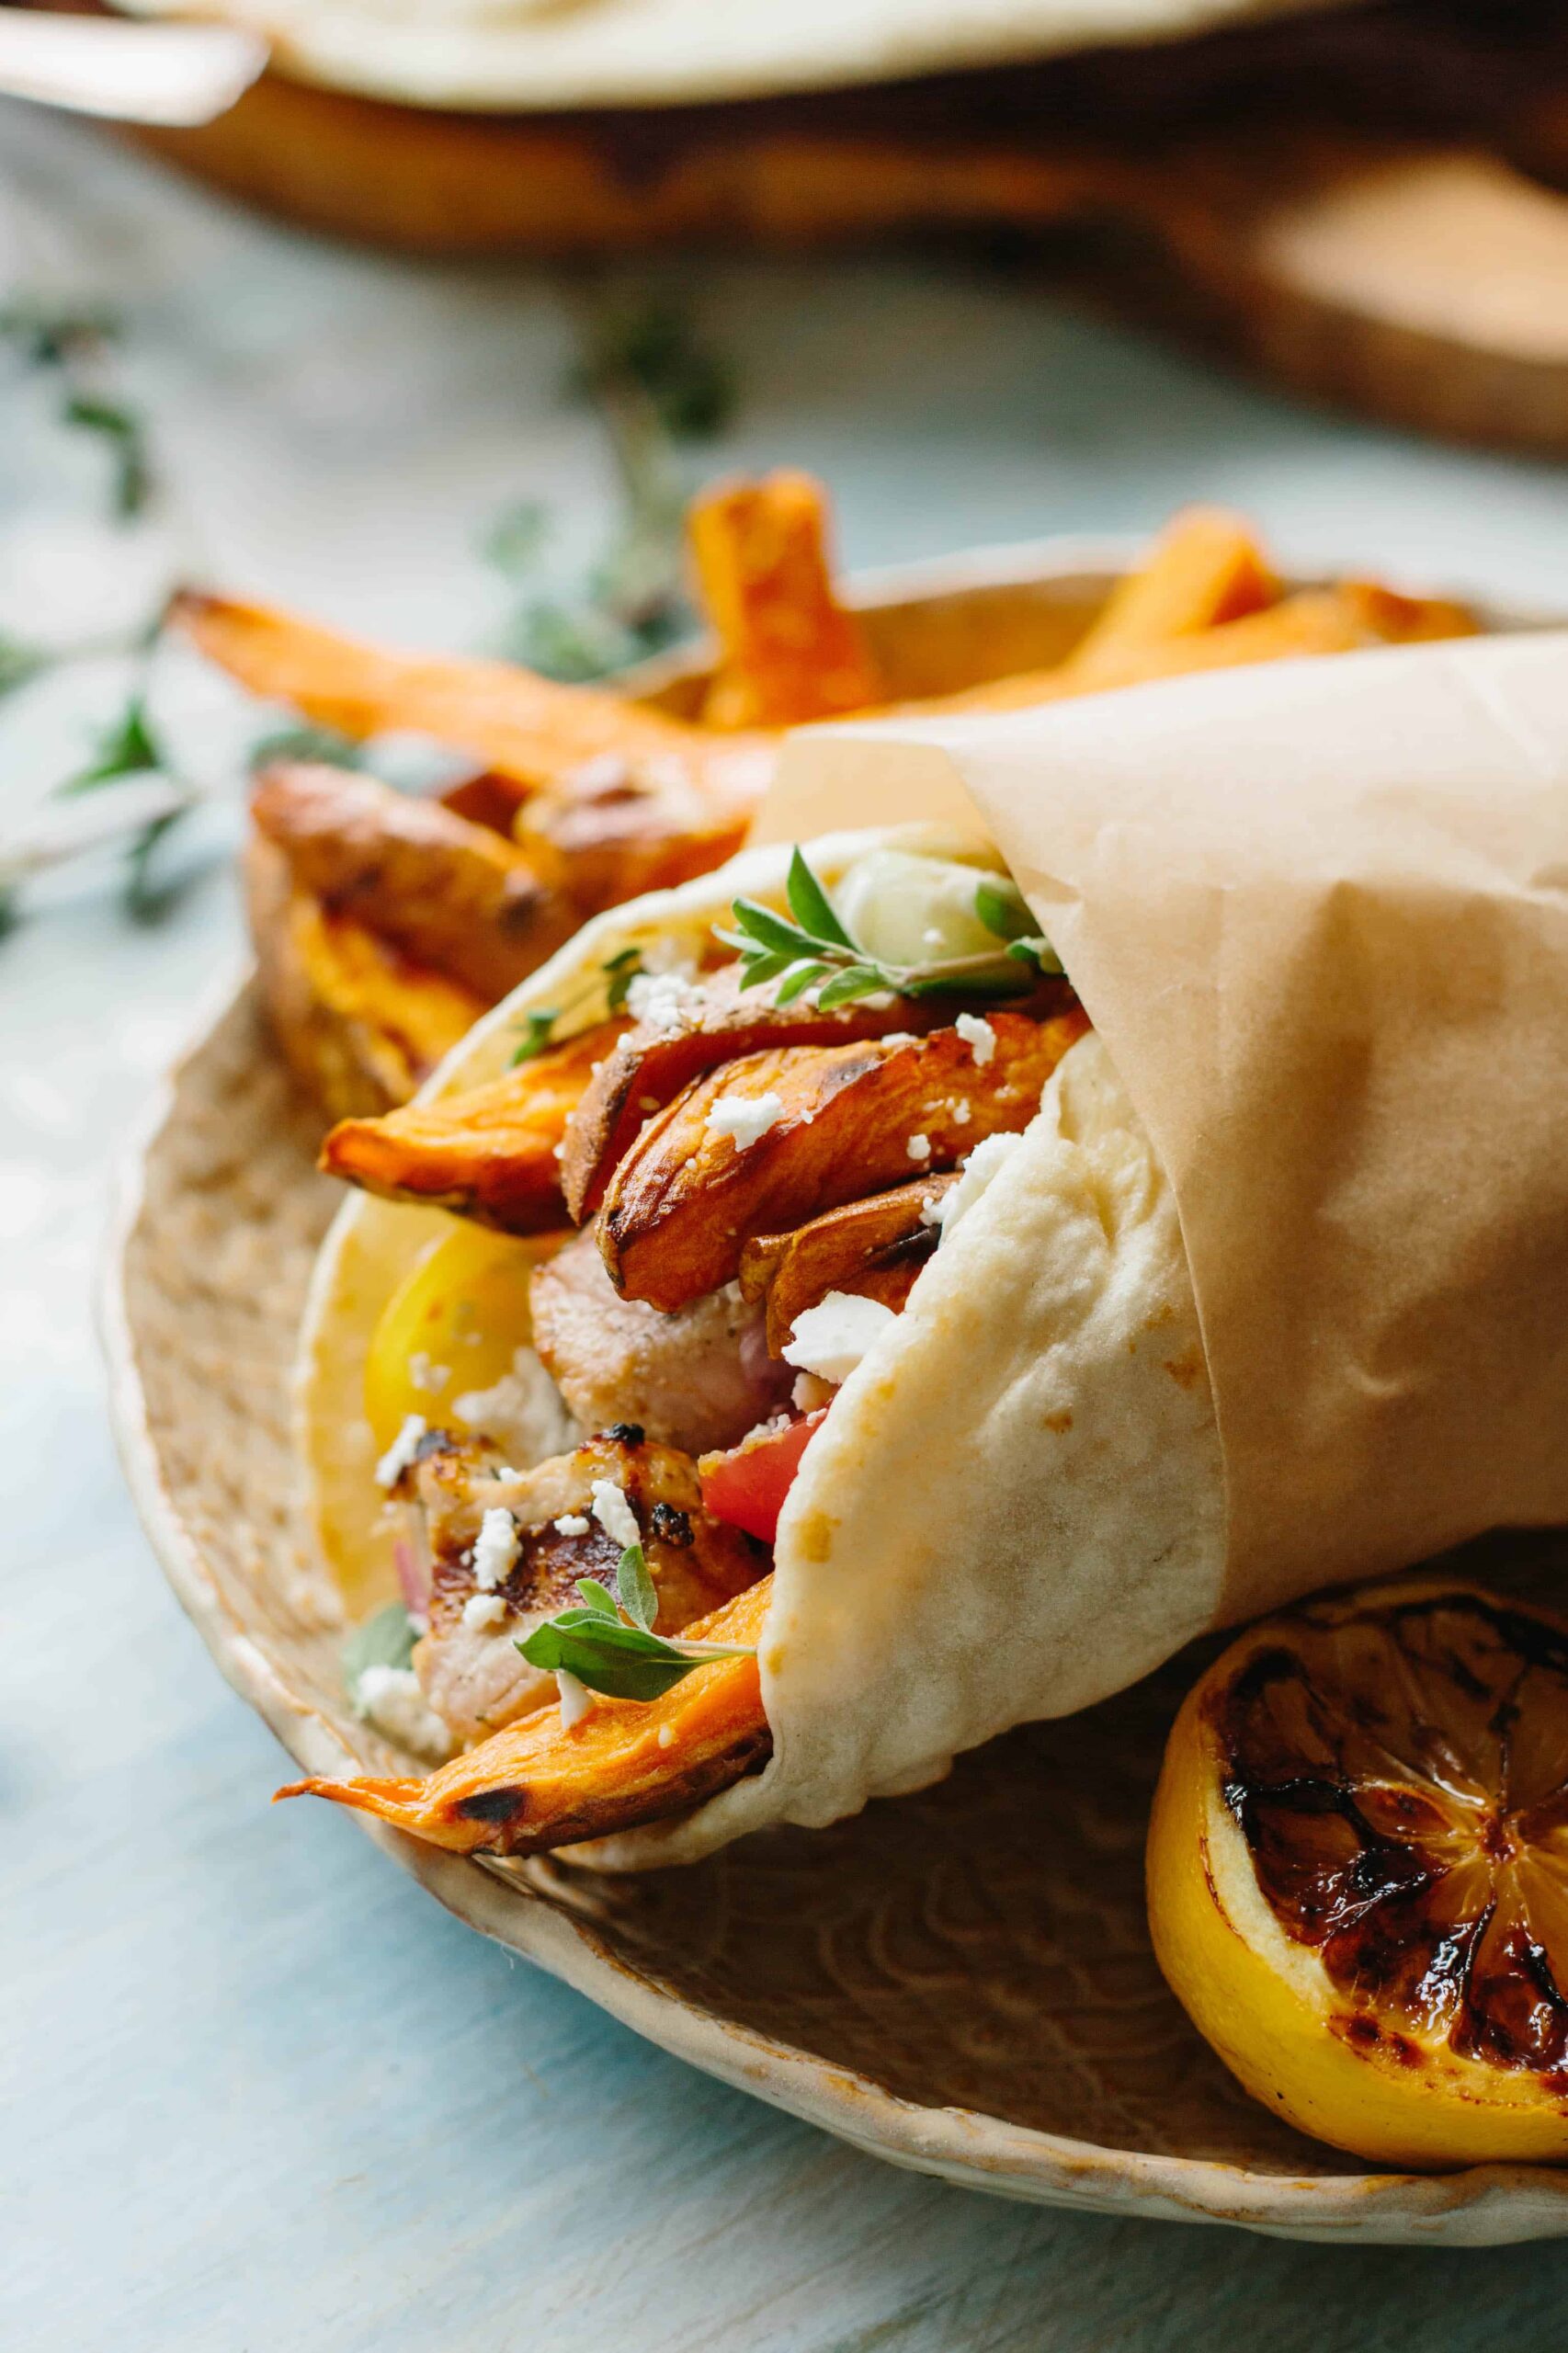 Pork kebab meat in a pita, wrapped in parchment paper.